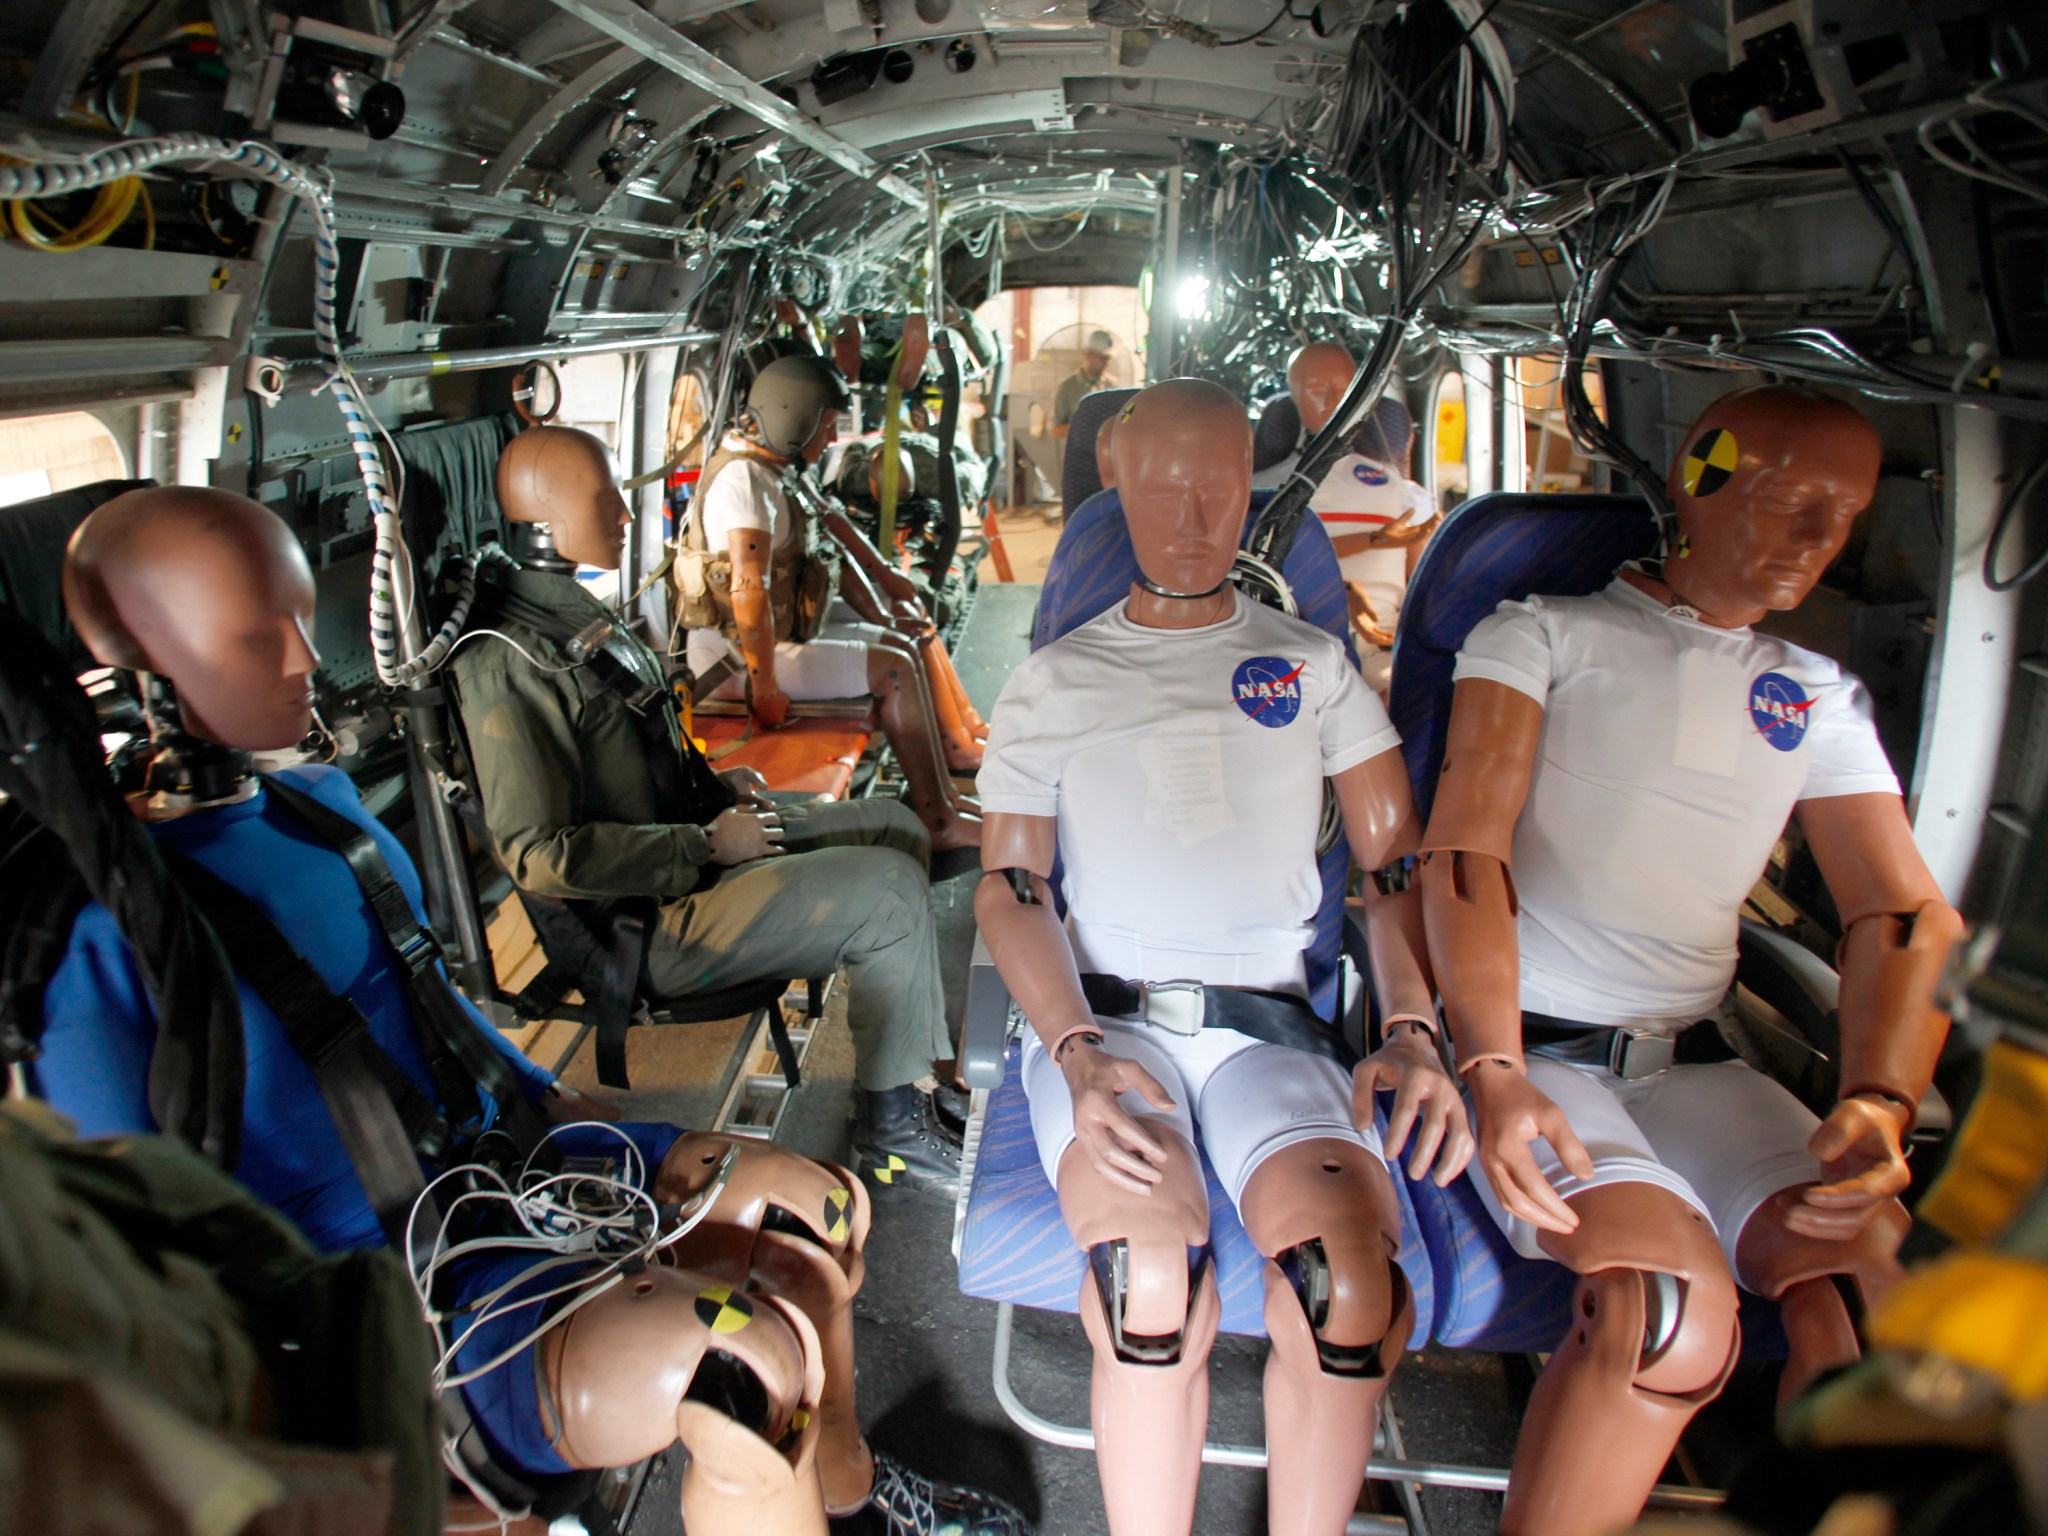 Crash test dummies in seats within the helicopter that will go through a crash test.